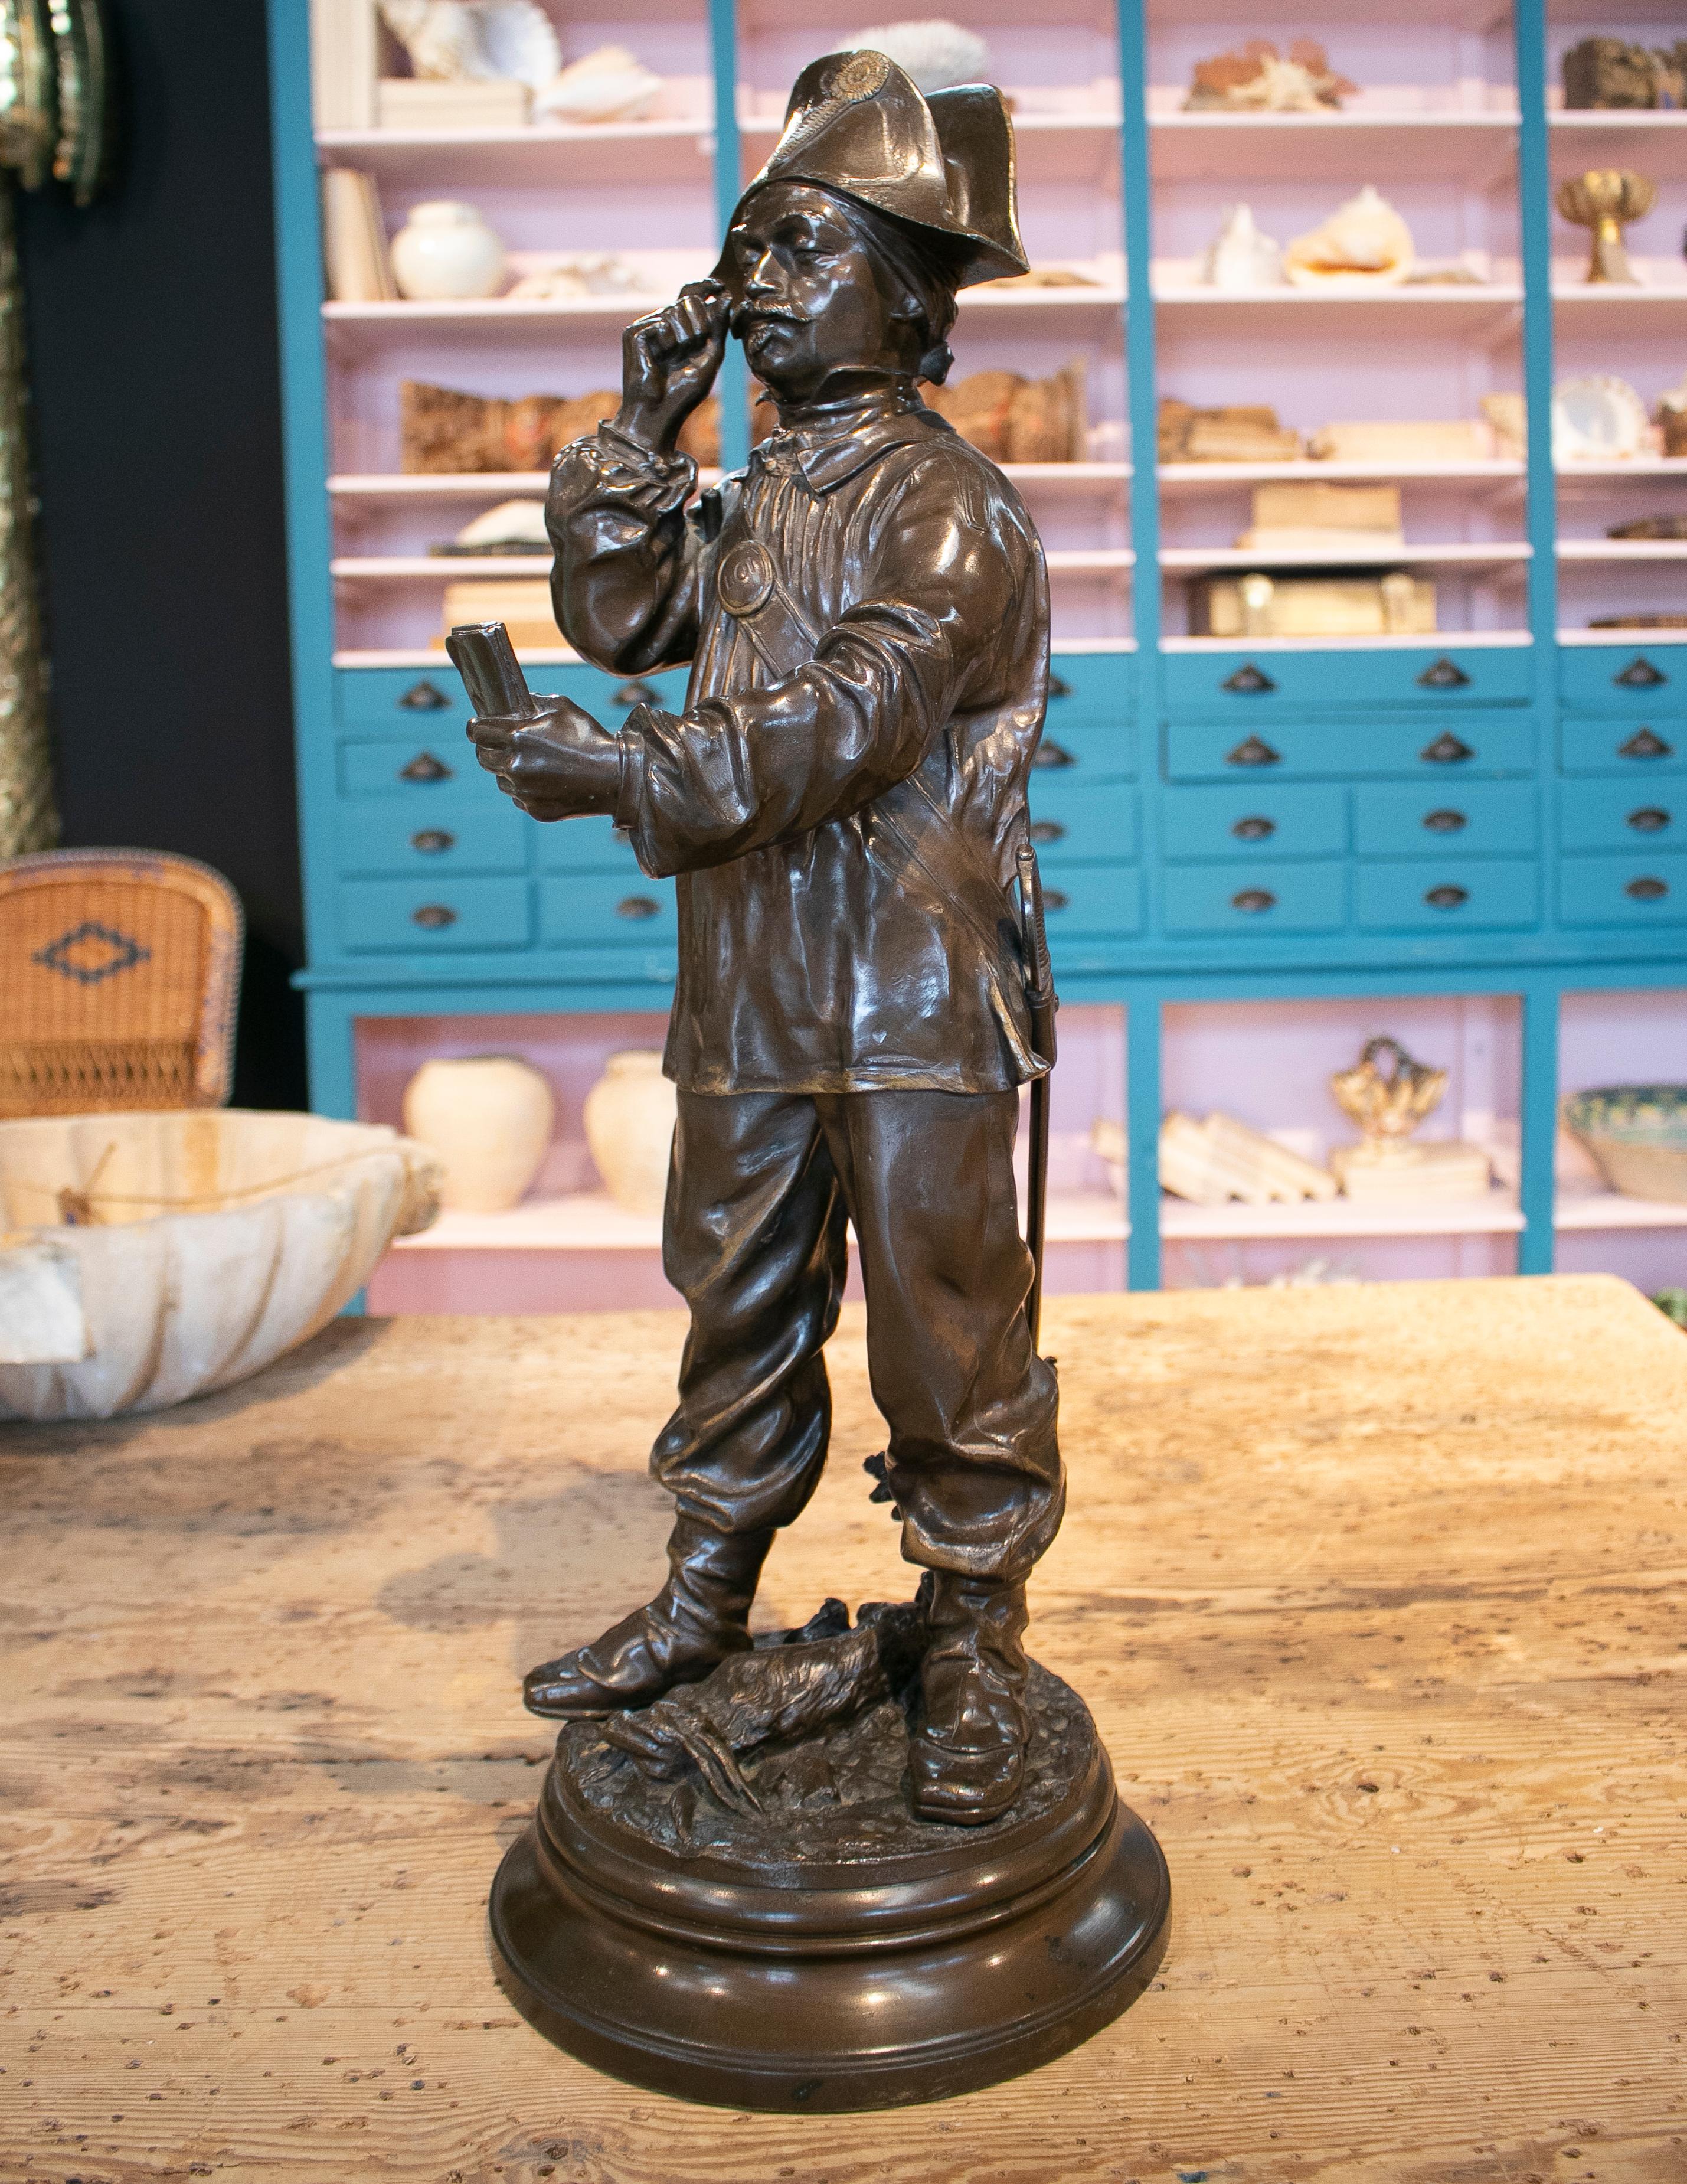 Antique 19th century French tax collector bronze figure sculpture.